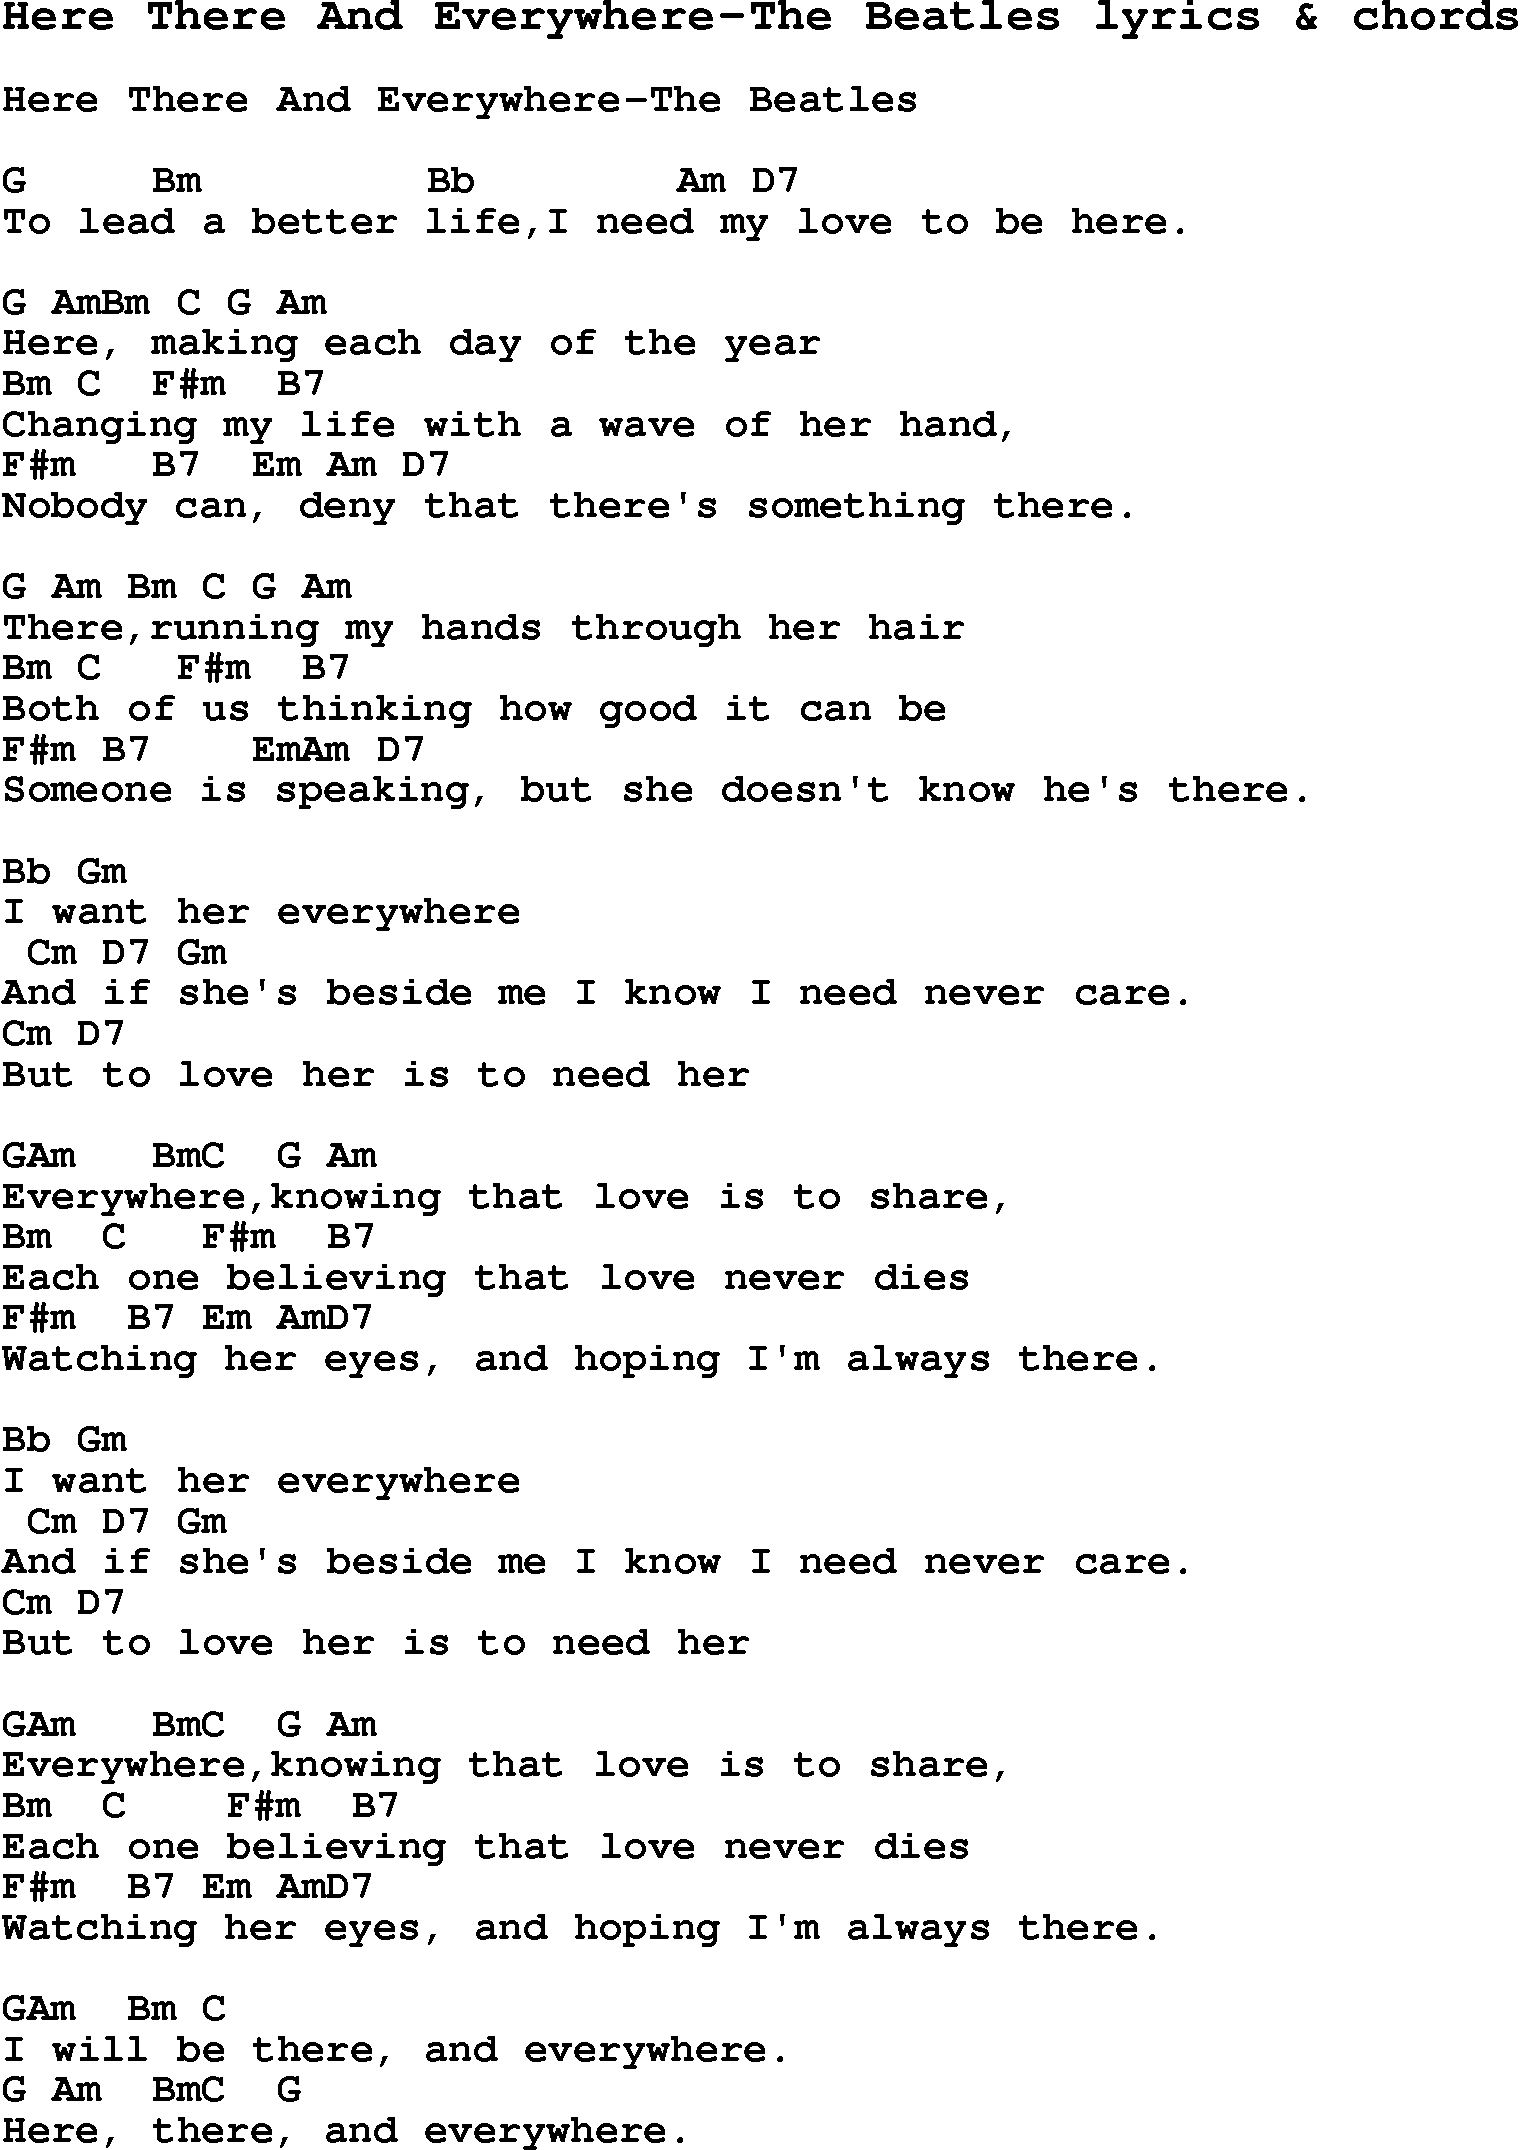 Love Song Lyrics for: Here There And Everywhere-The Beatles with chords for Ukulele, Guitar Banjo etc.